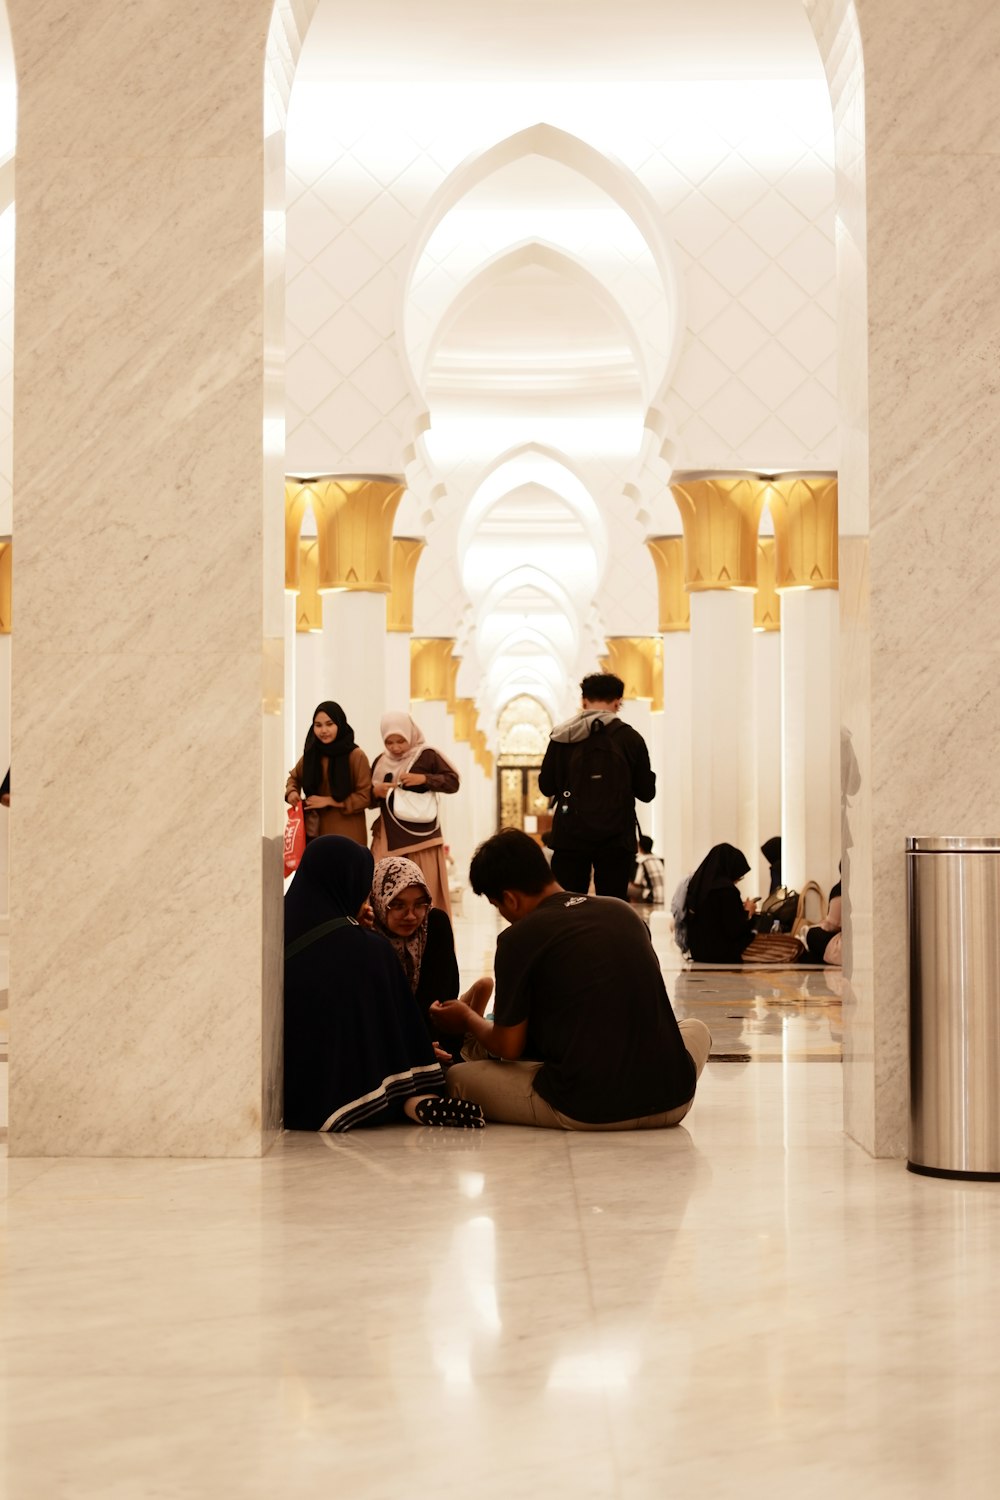 a group of people sitting on the floor of a building